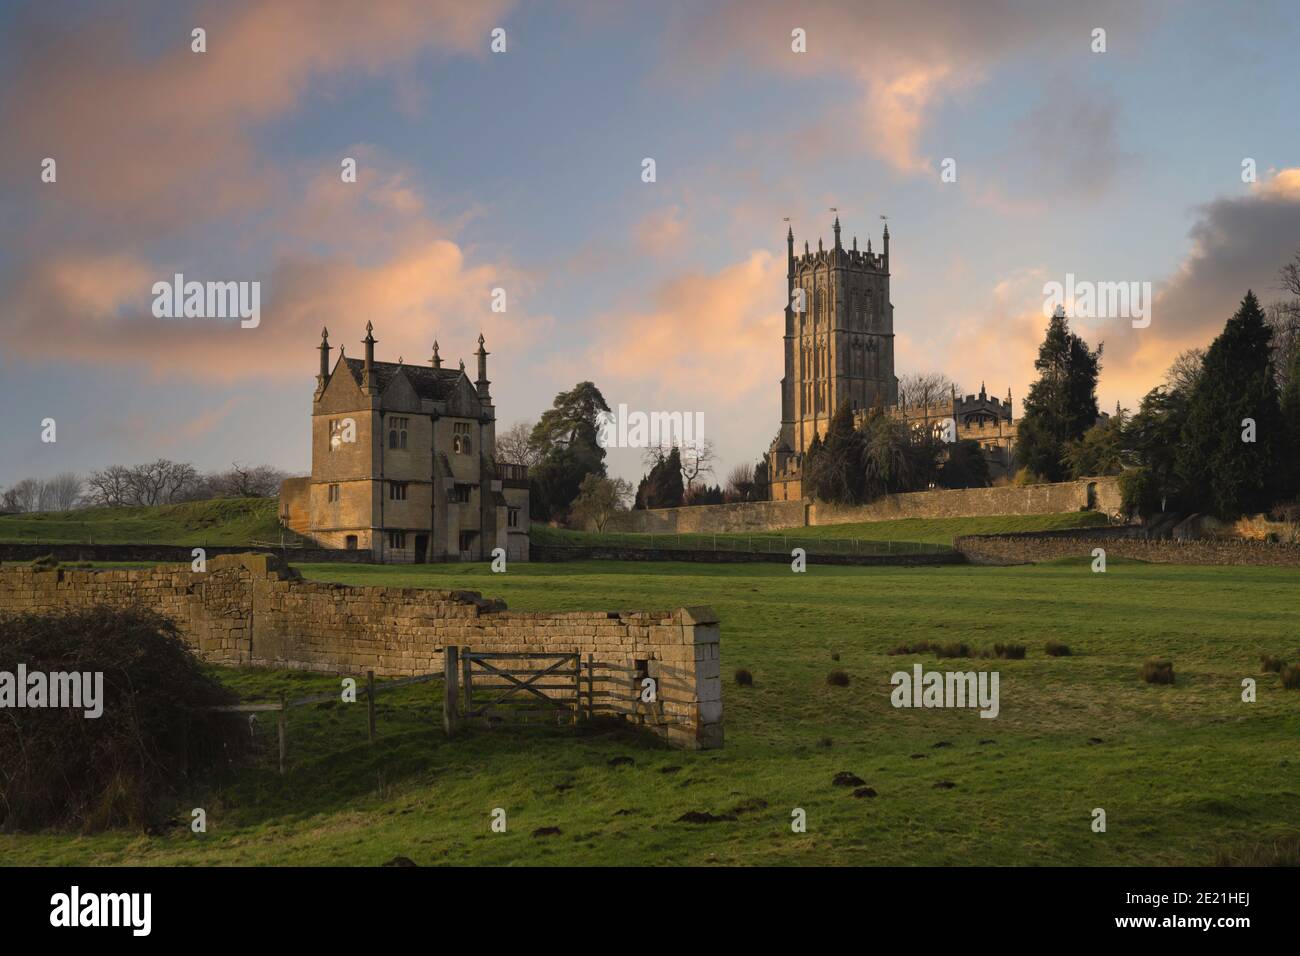 Chipping Campden Church and Banqueting House, Cotswolds, Angleterre. Banque D'Images